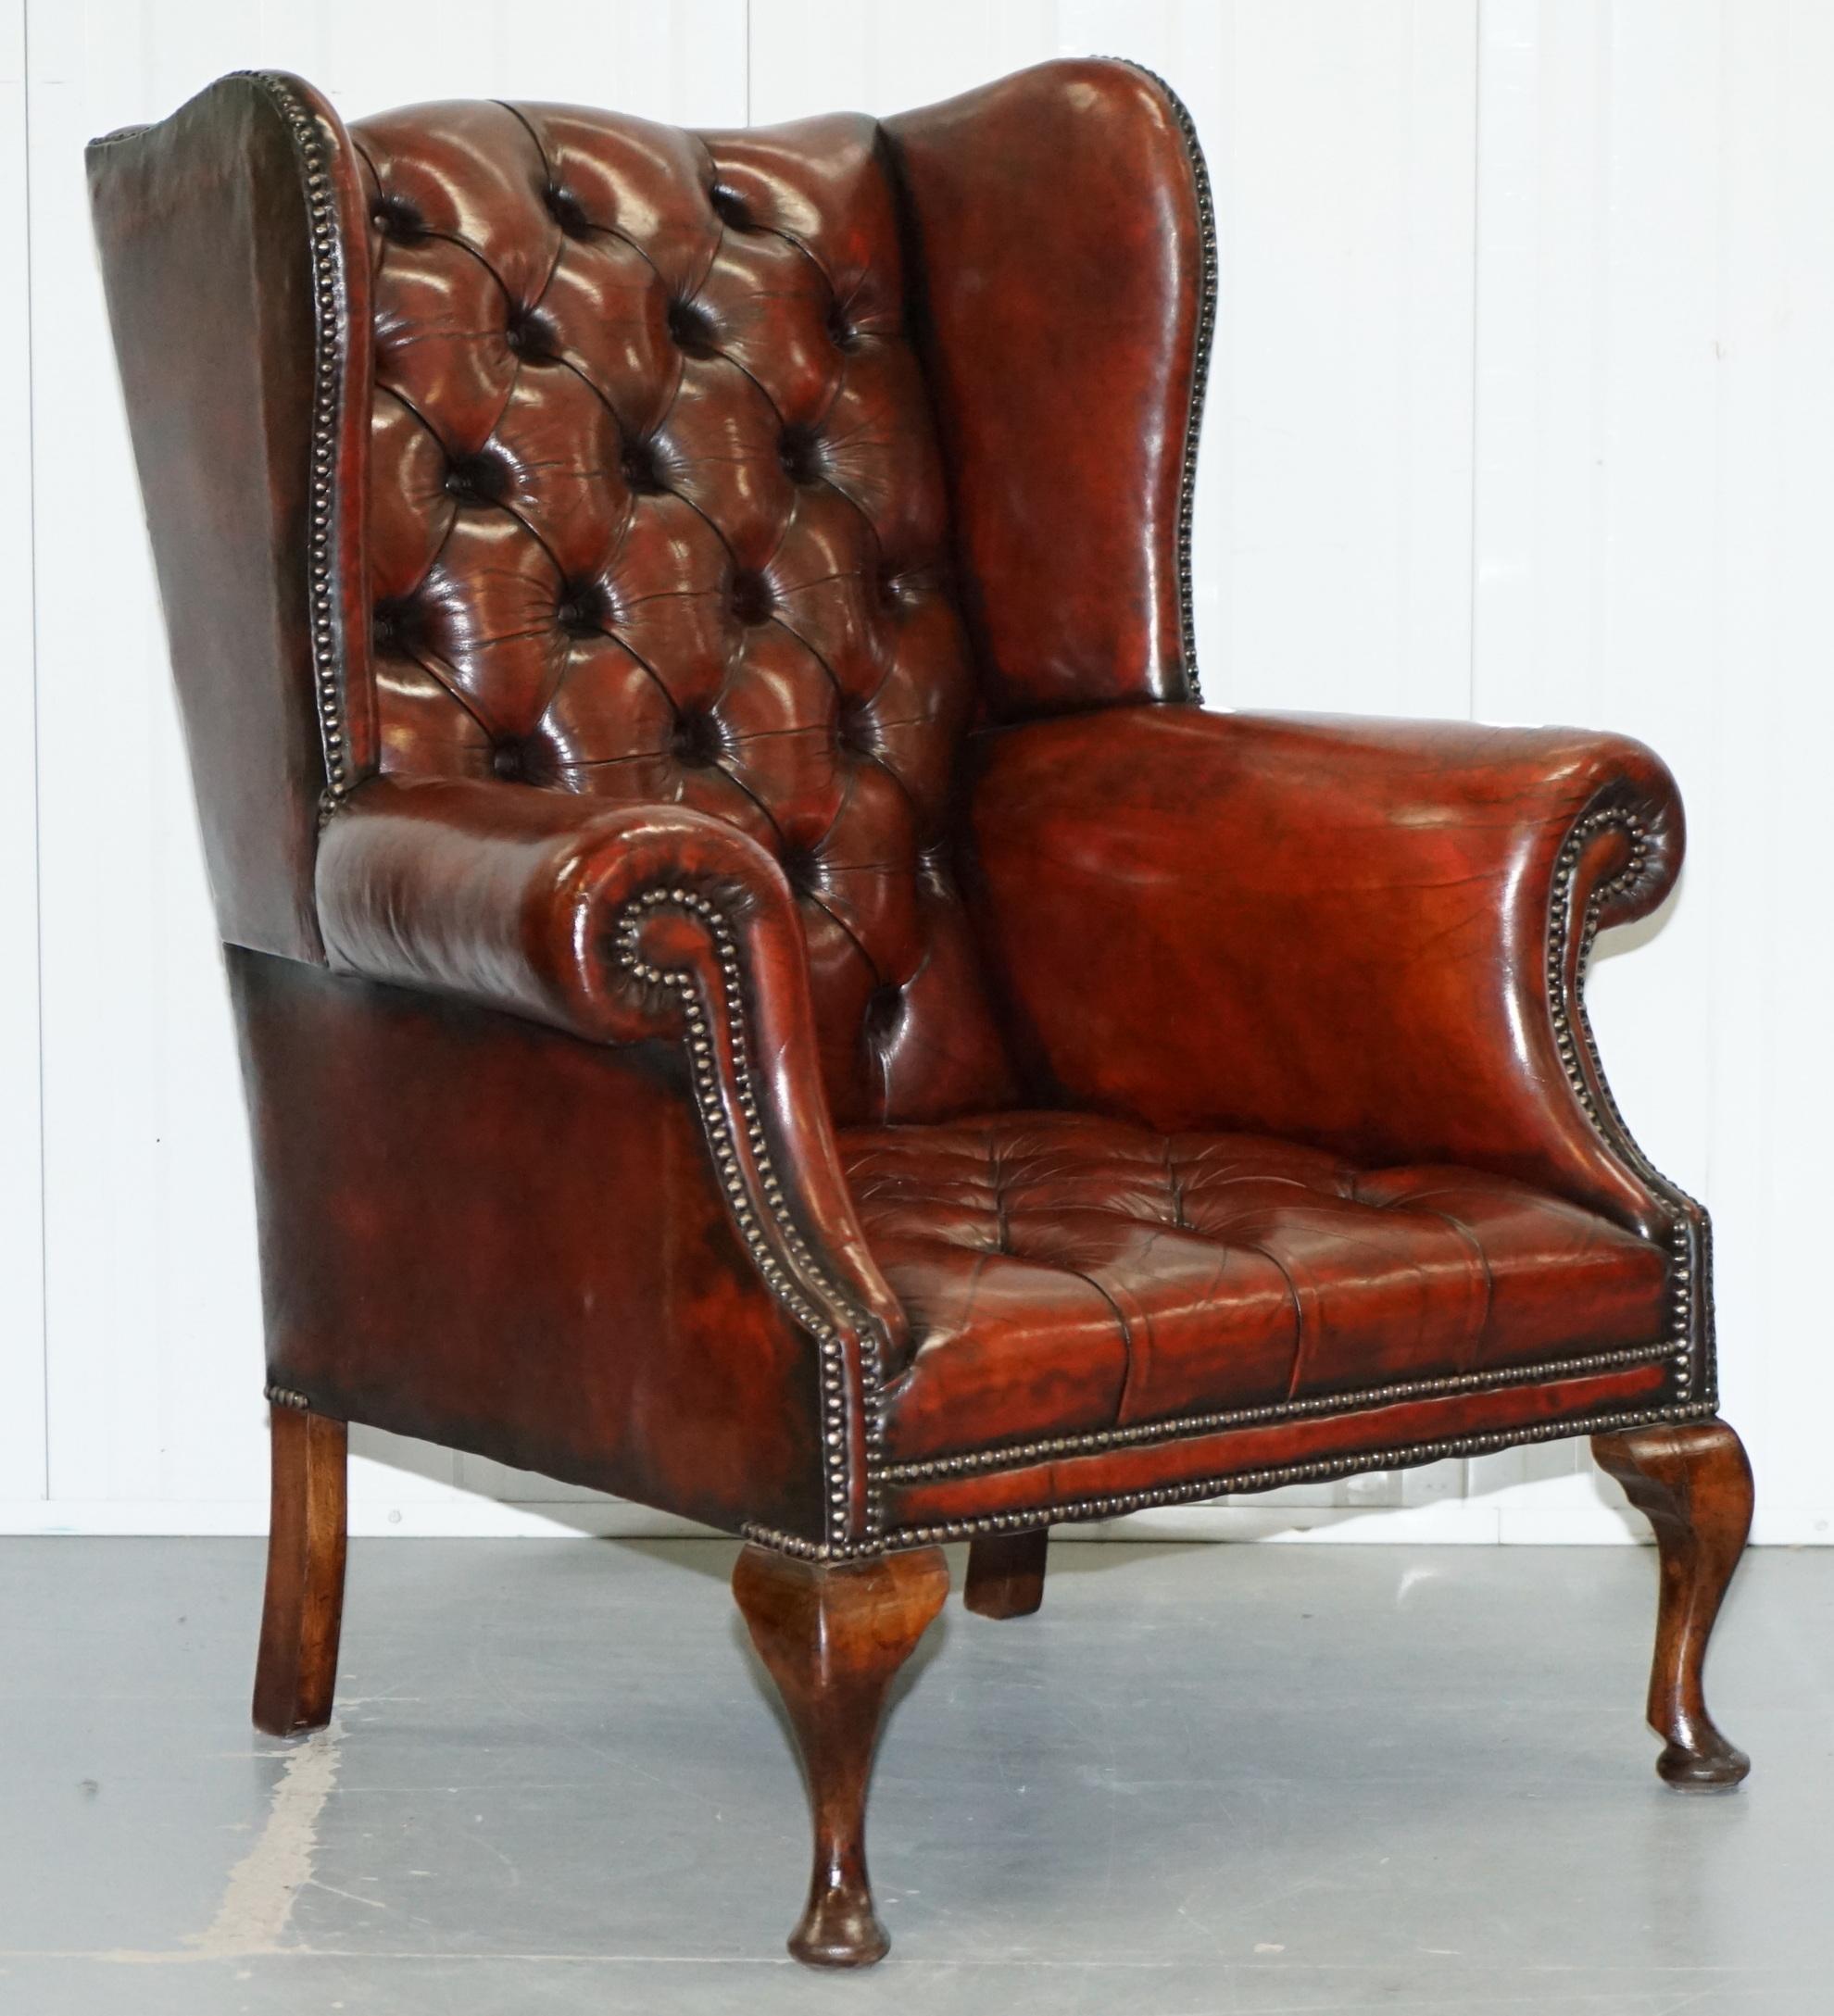 We are delighted to offer for sale this stunning pair of lovely fully restored vintage all buttoned armchairs in brown leather.

These chairs are a real tour de force, they have absolutely everything going for them, the leather hide is original